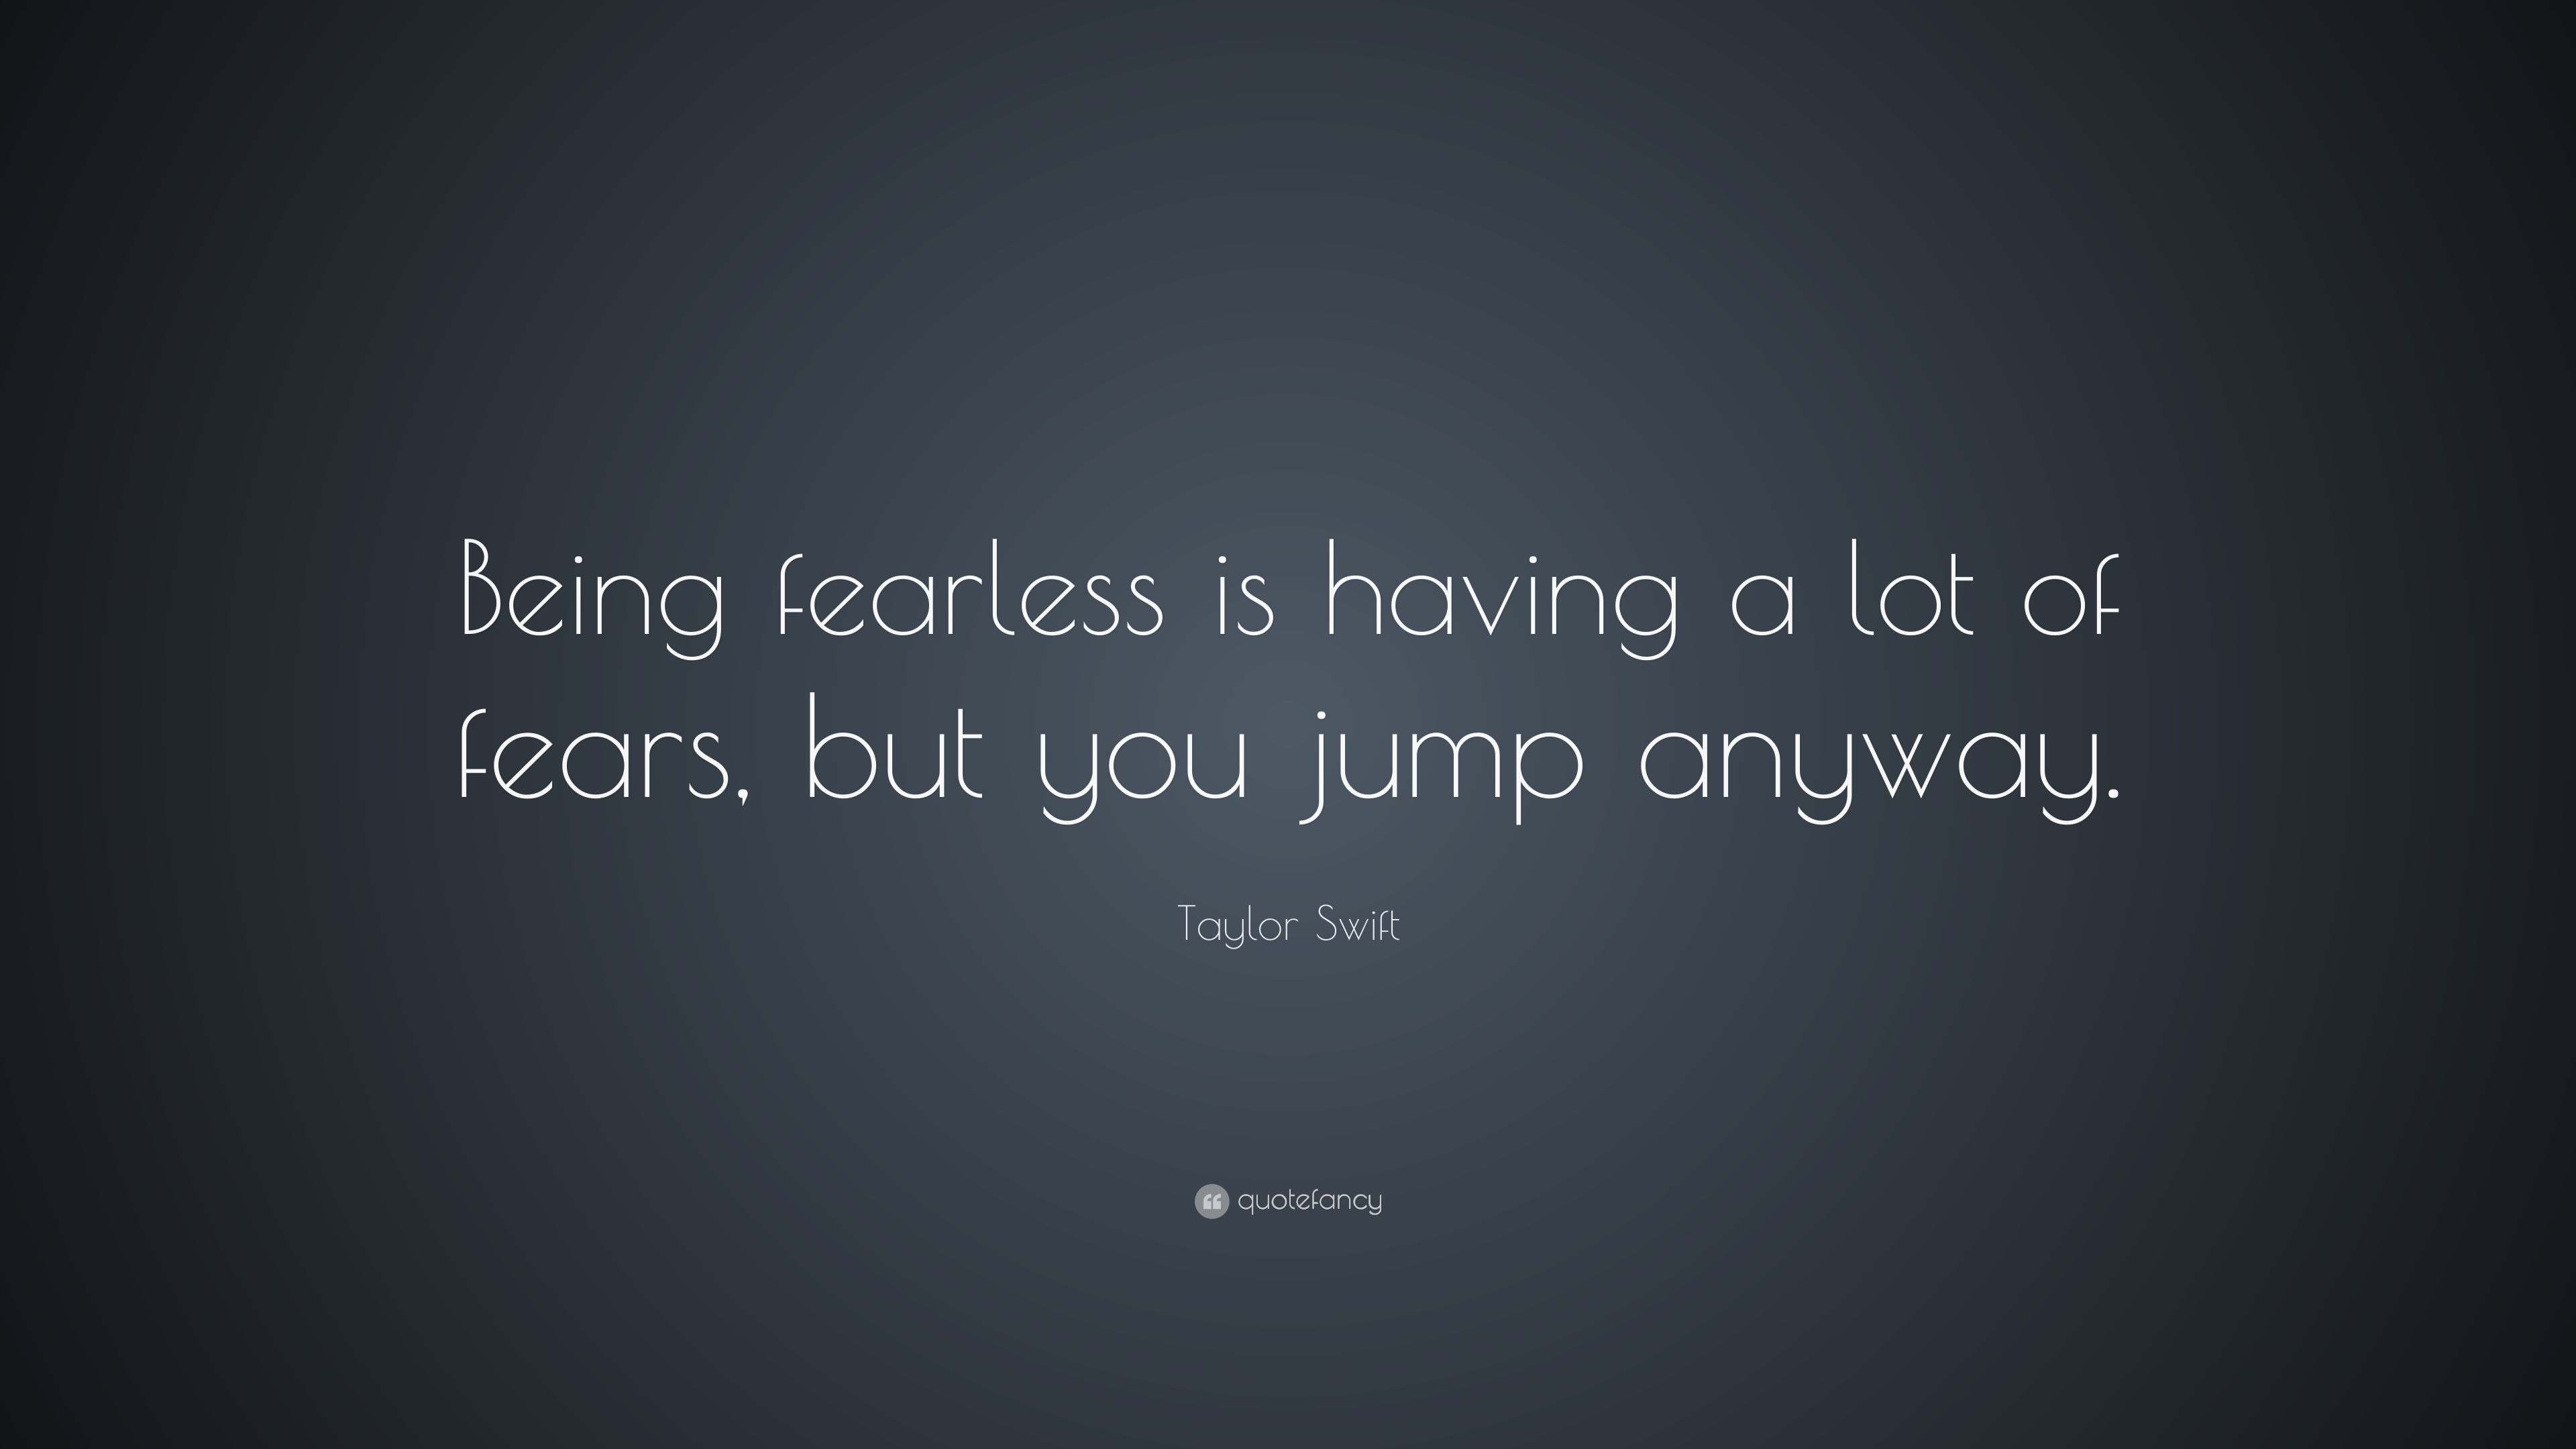 Taylor Swift Quote: “Being fearless is having a lot of fears, but ...